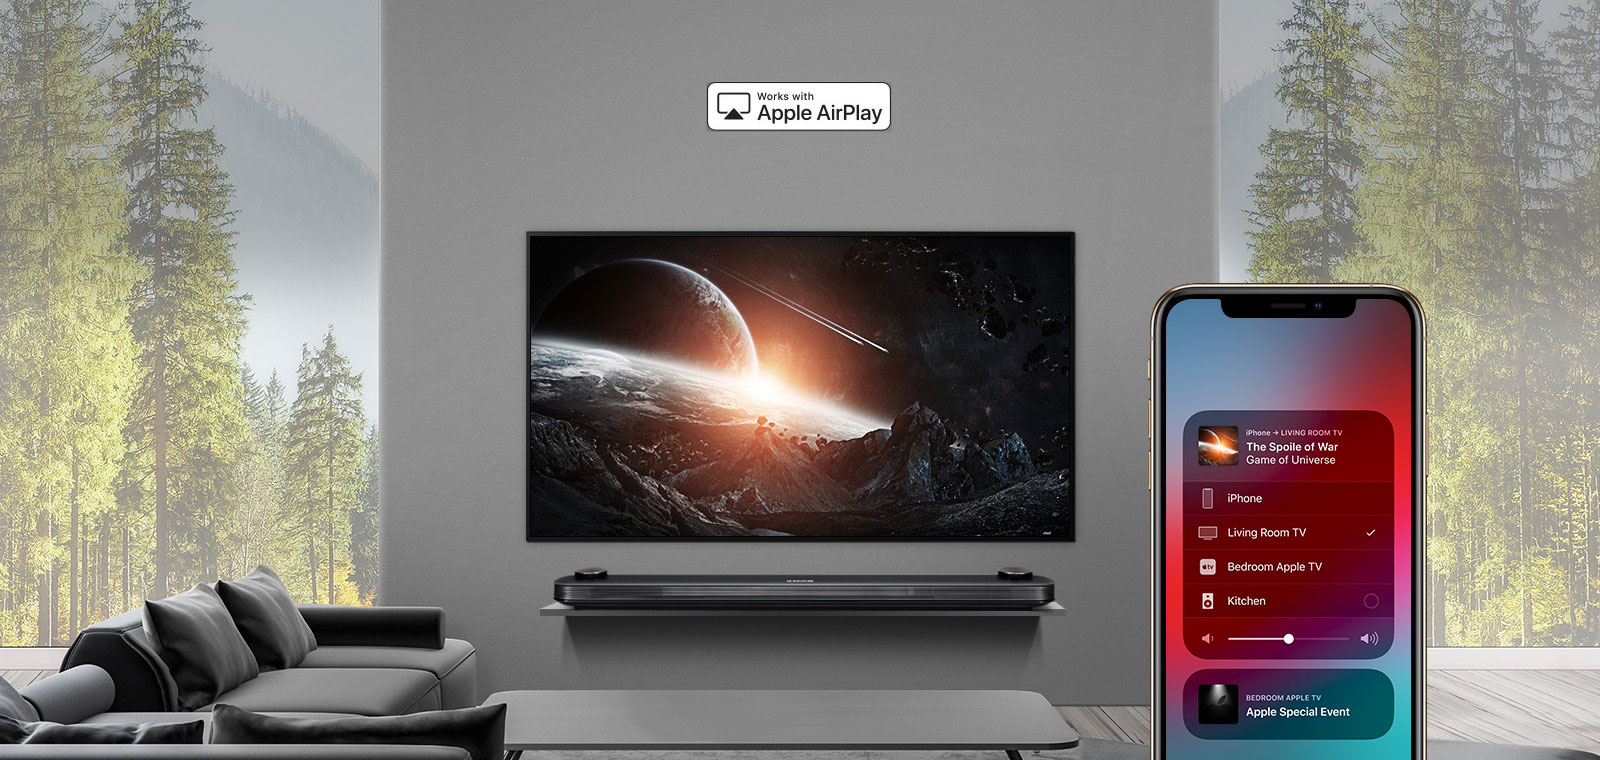 Airplay Lets You Do It All - Lg Oled 55 B9 - HD Wallpaper 